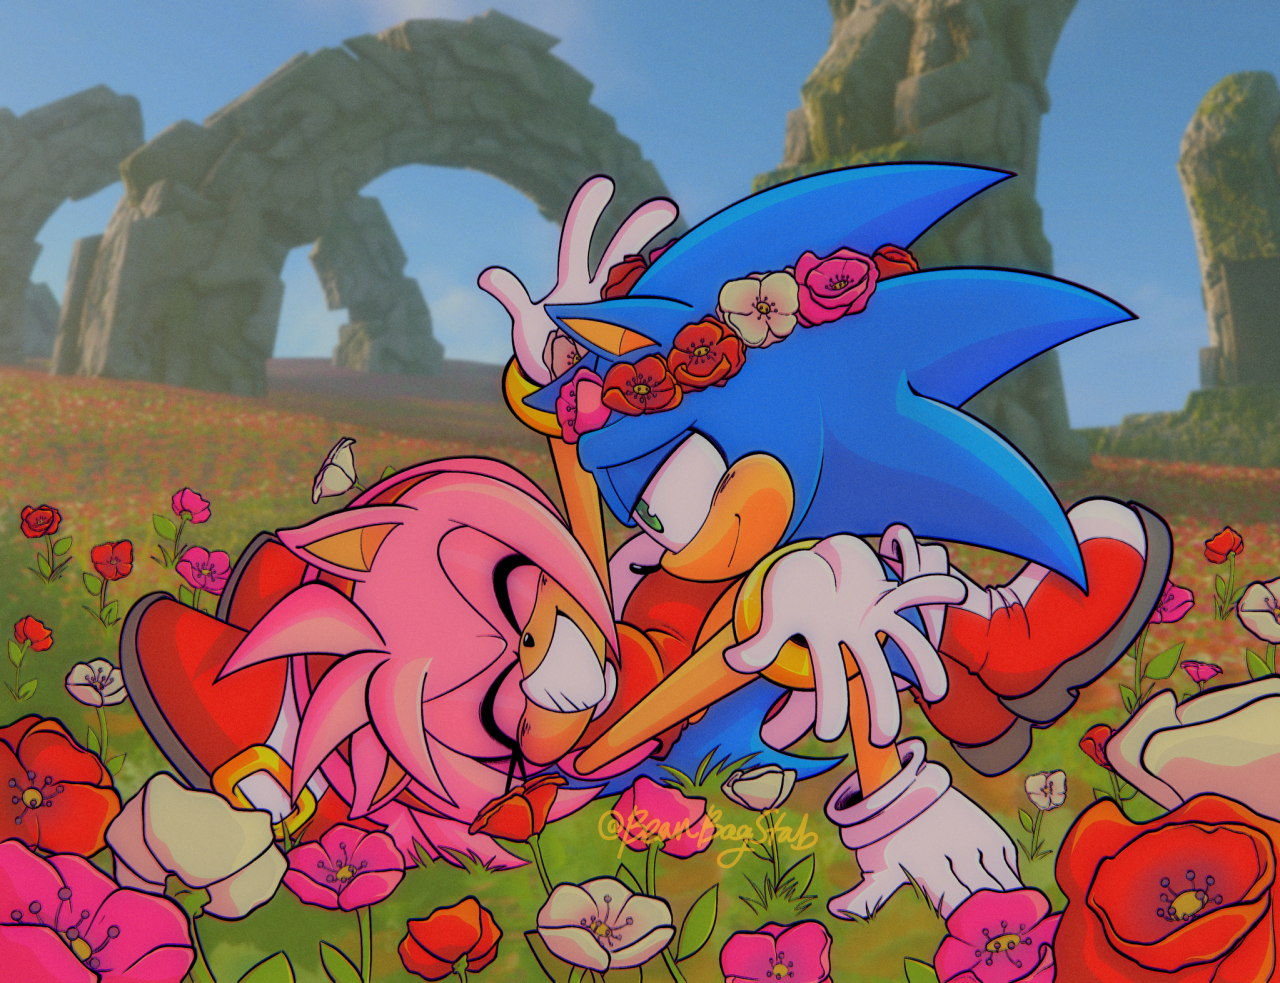 sonic the hedgehog and amy rose (sonic) drawn by steffybs